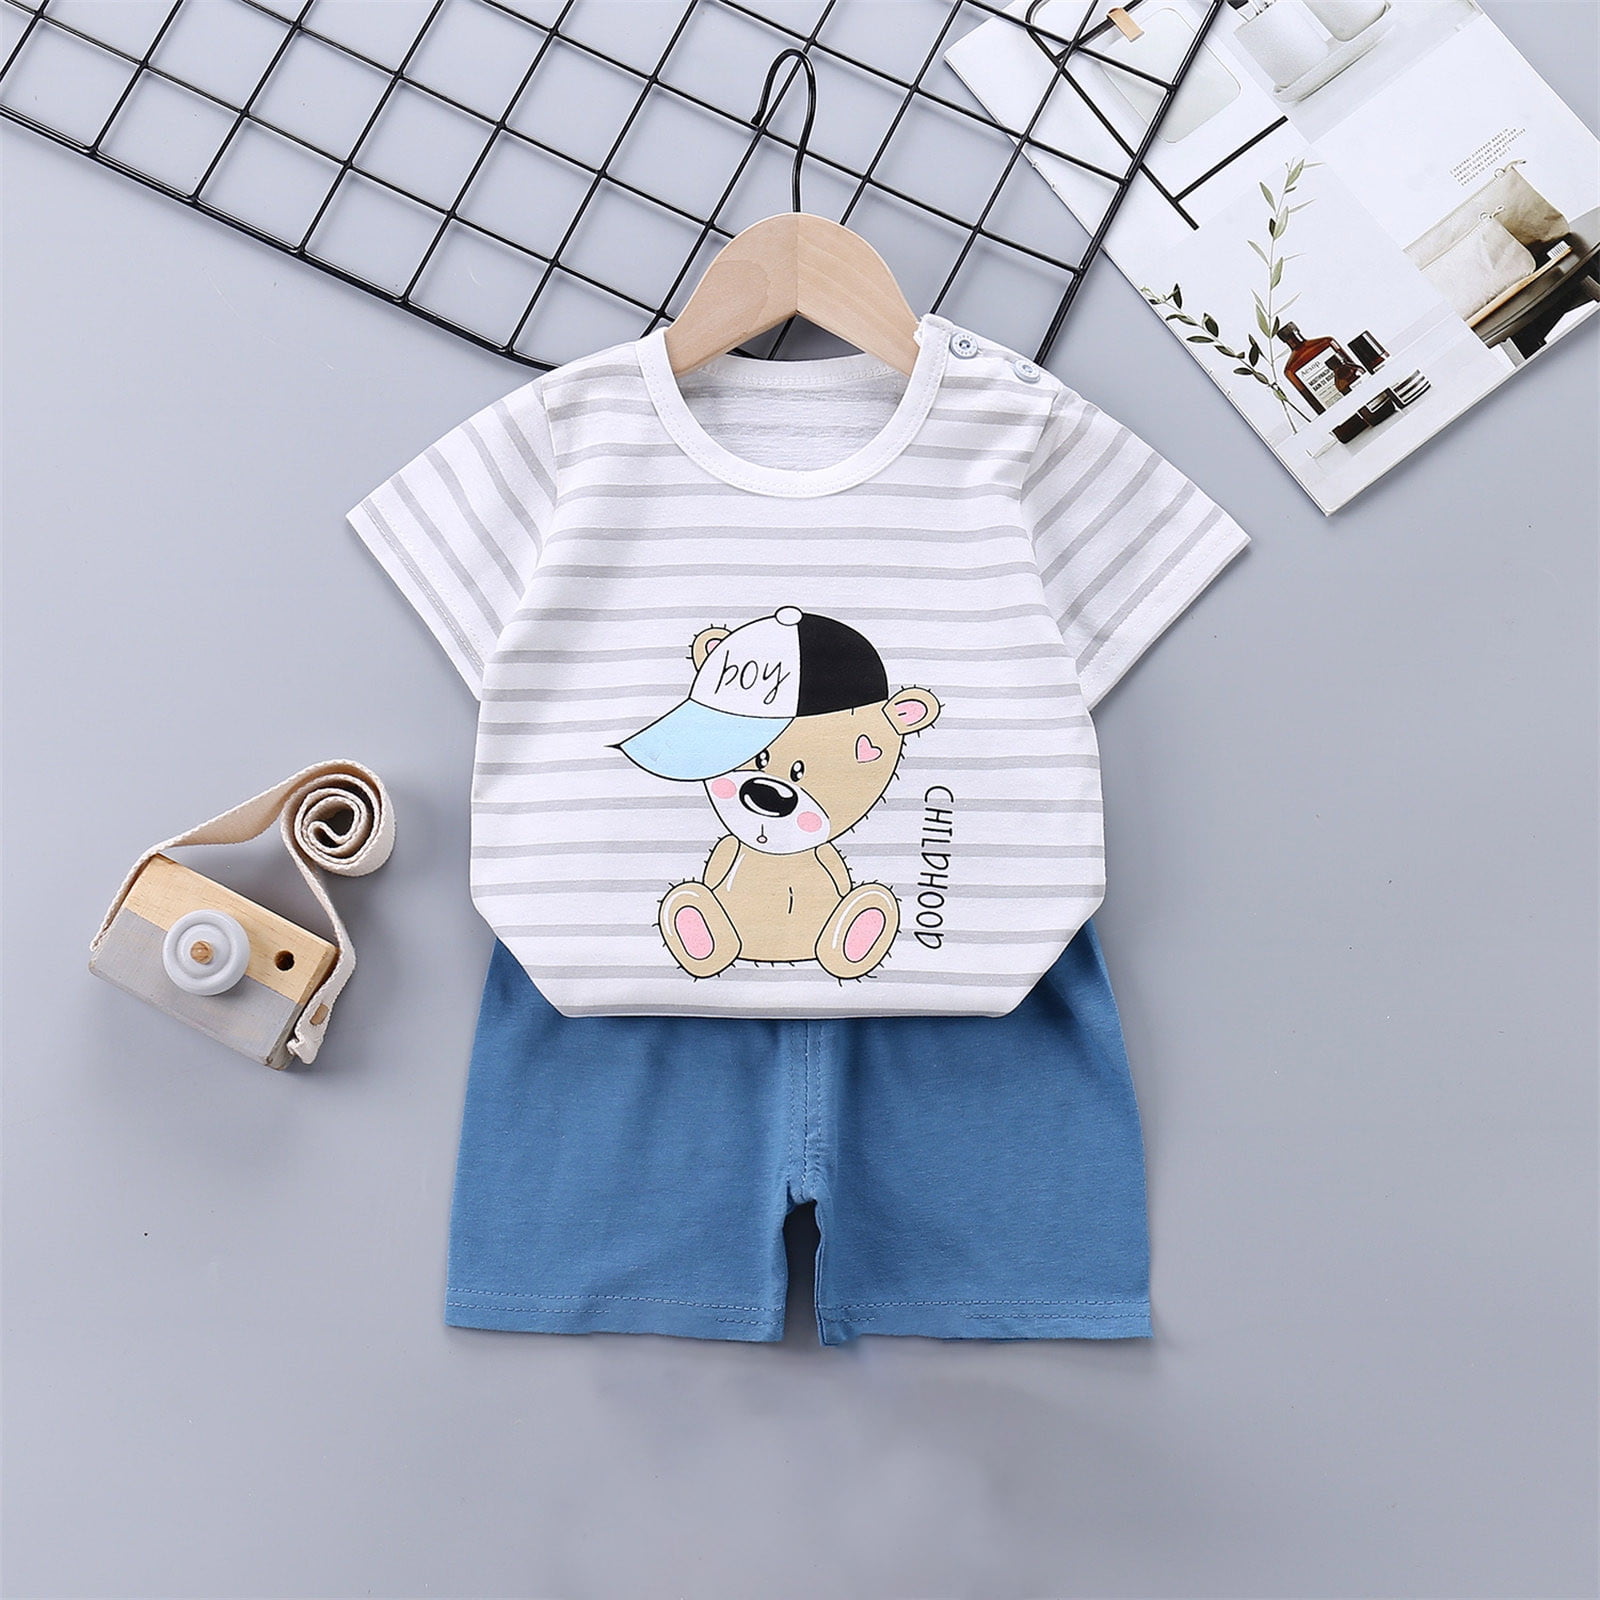 Deal of The Day! Pitauce Toddler Clothes Cartoon Fashion Cute Print ...